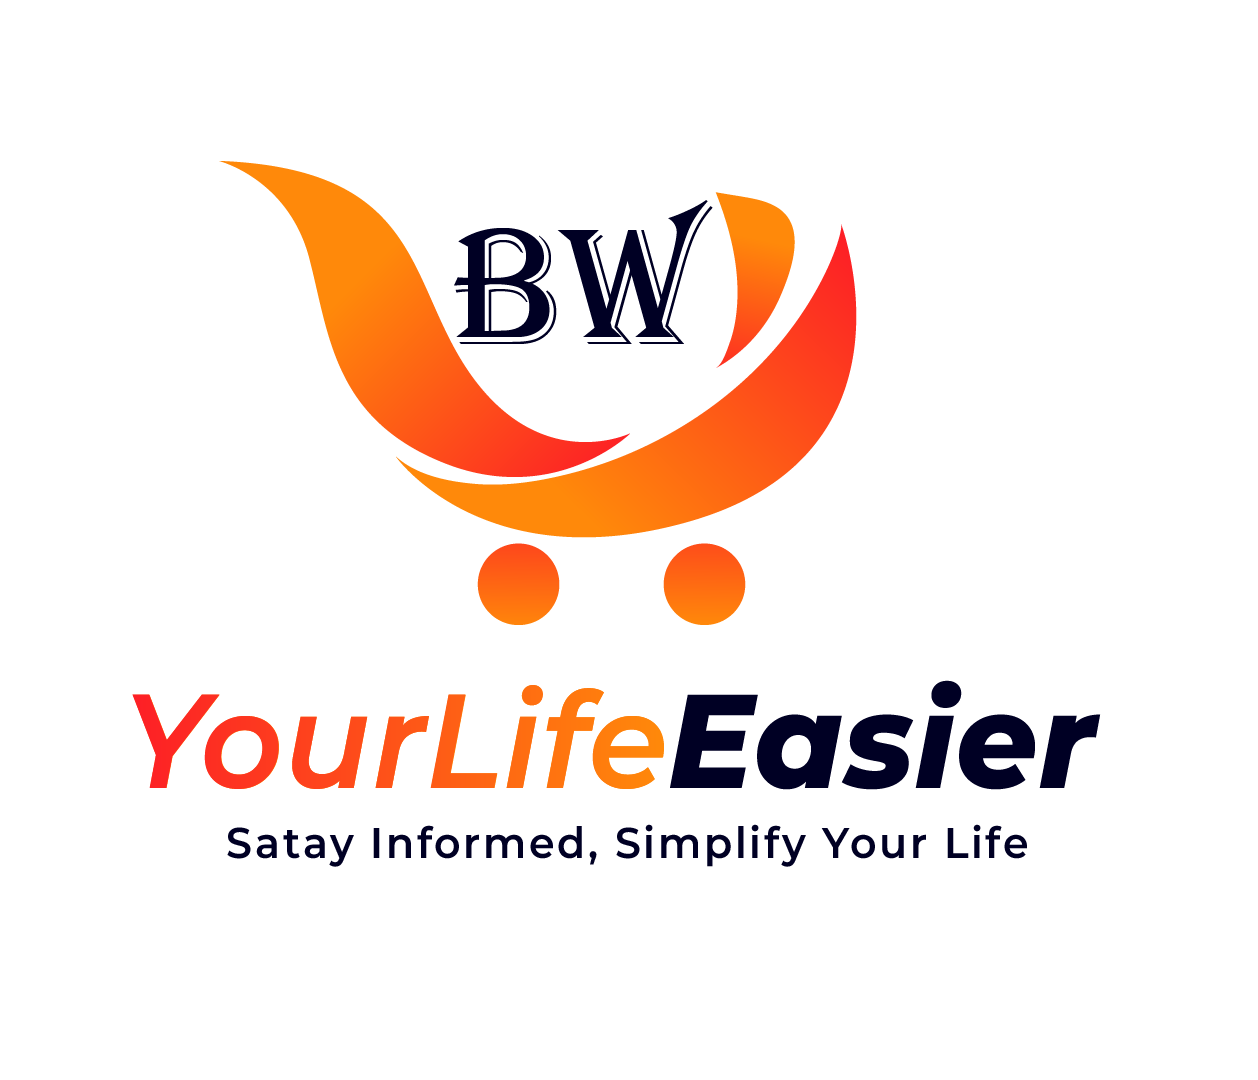 BW-Store Your Life Easier Logo